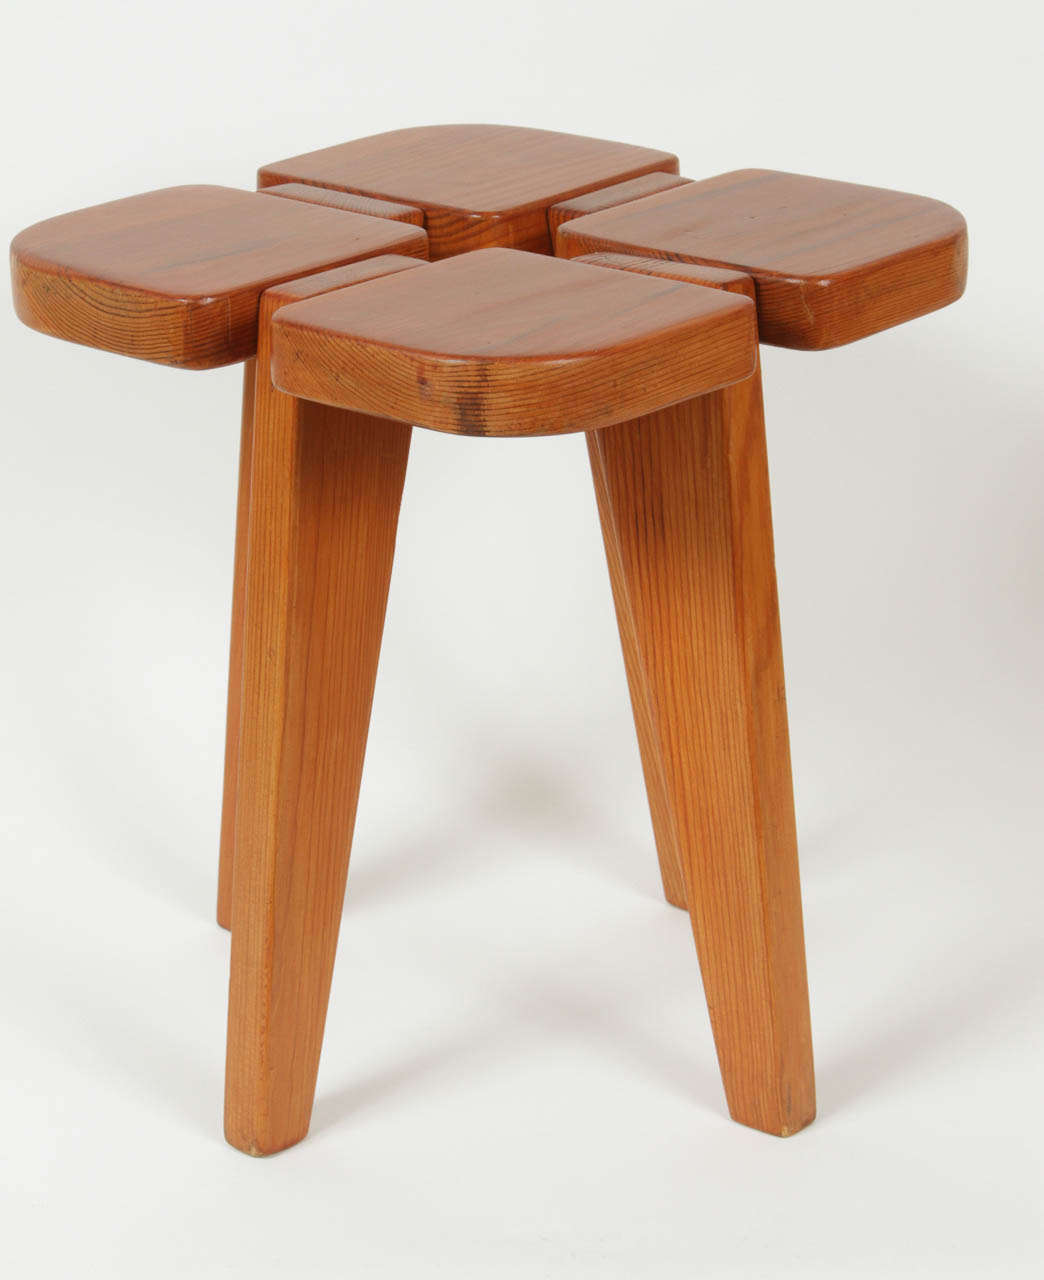 Mid-20th Century Pair of Orgeon Pine Stools by Lisa Johansson-Pape For Sale